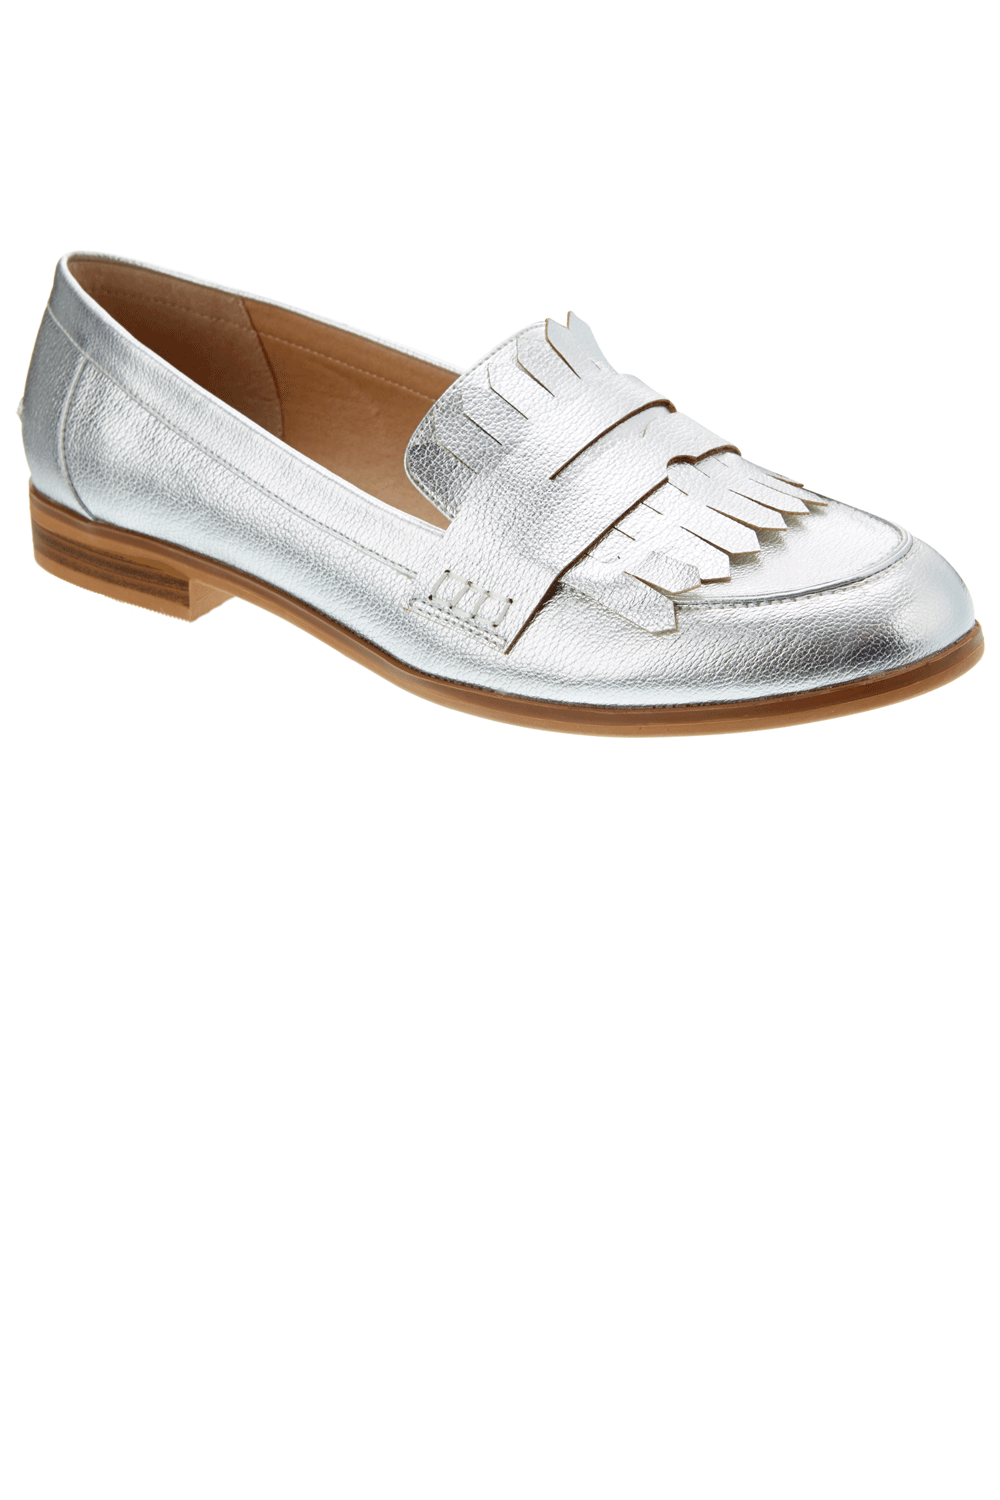 Silver Loafers, £16